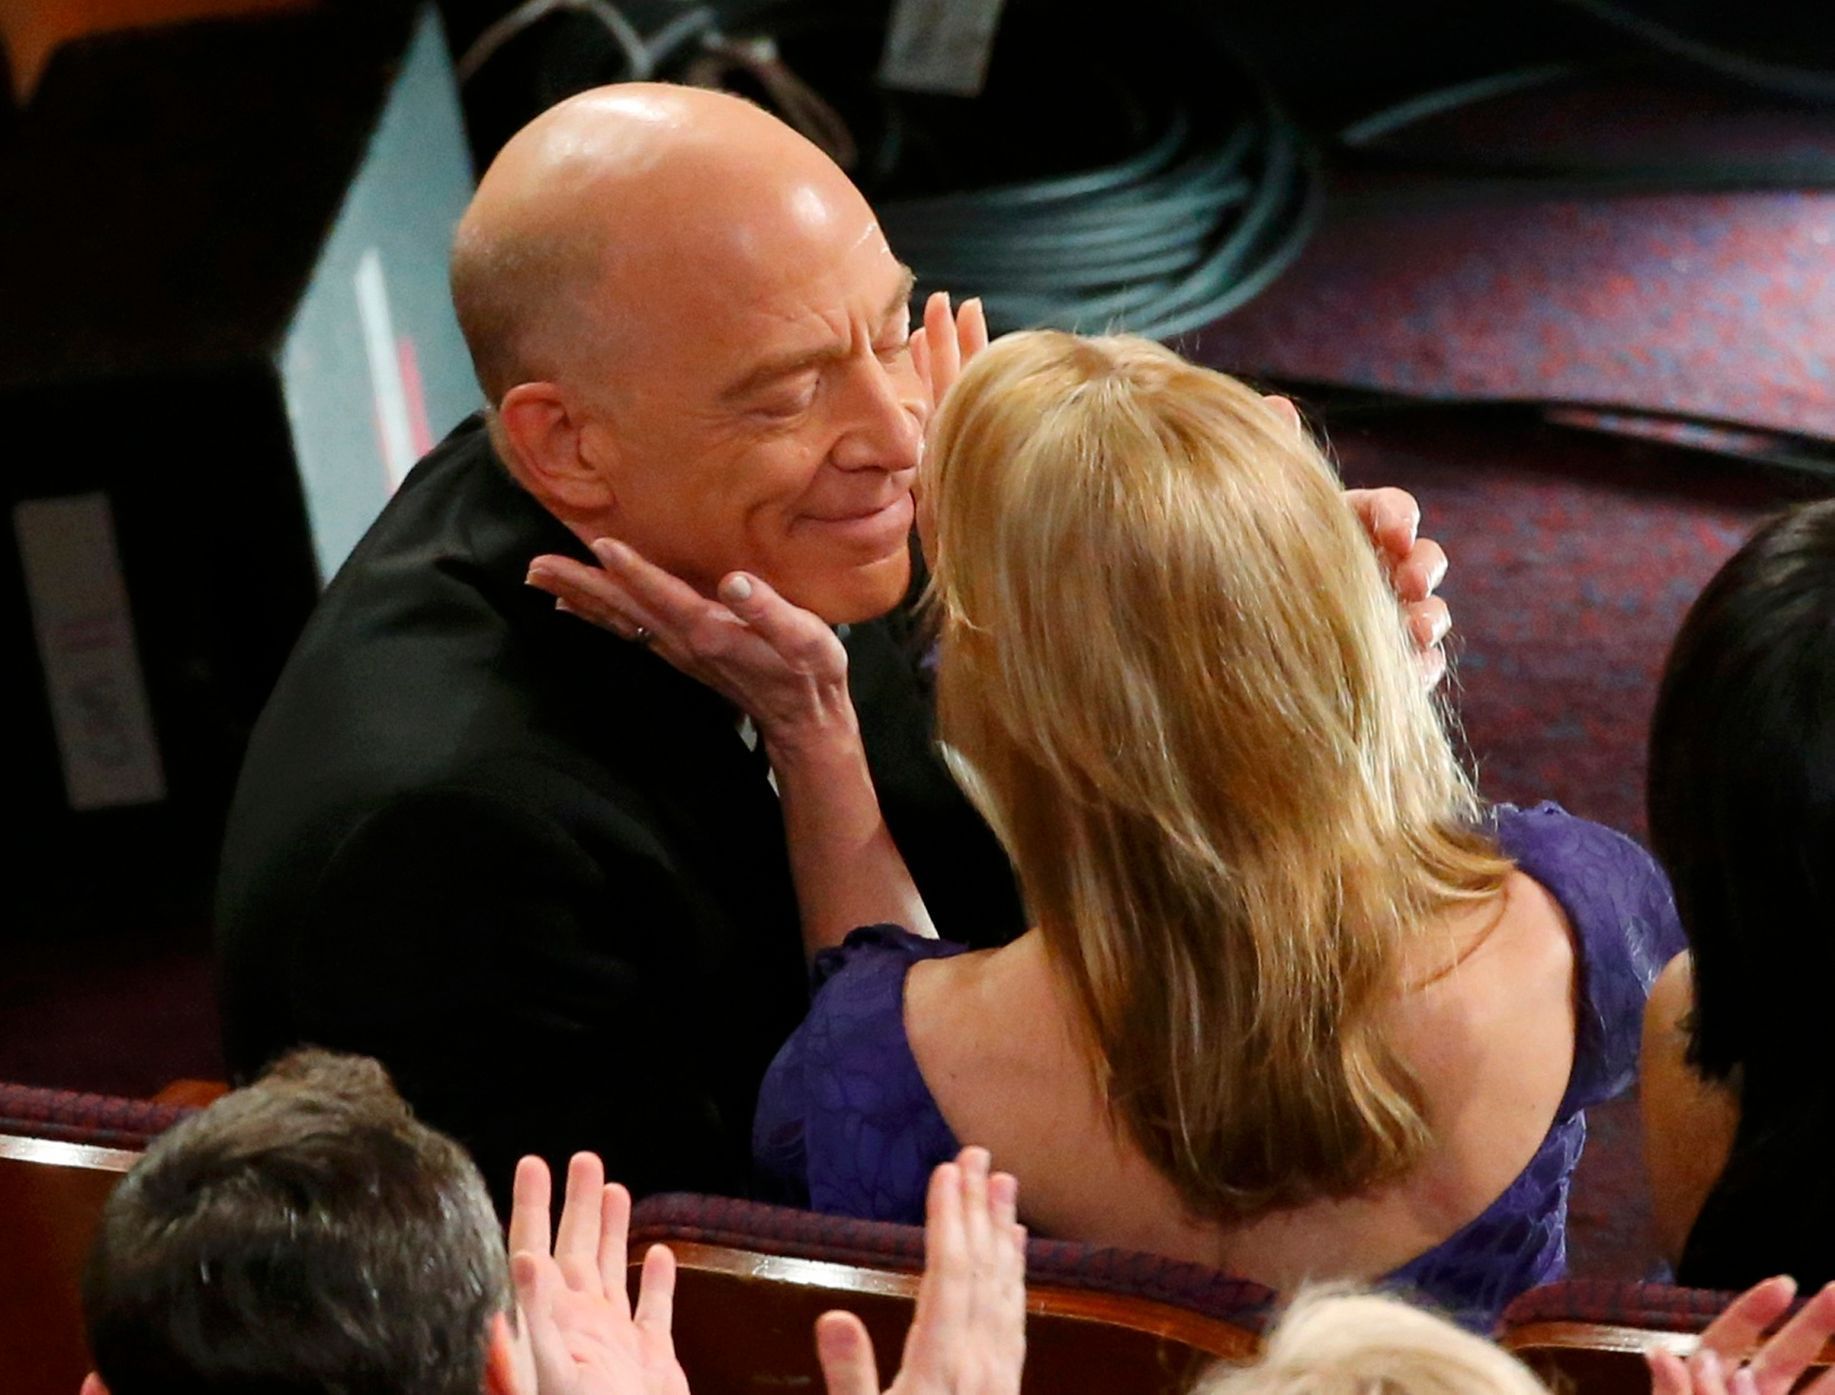 Best supporting actor winner Simmons  is congratulated by his wife Michelle Schumache at the 87th Academy Awards in Hollywood